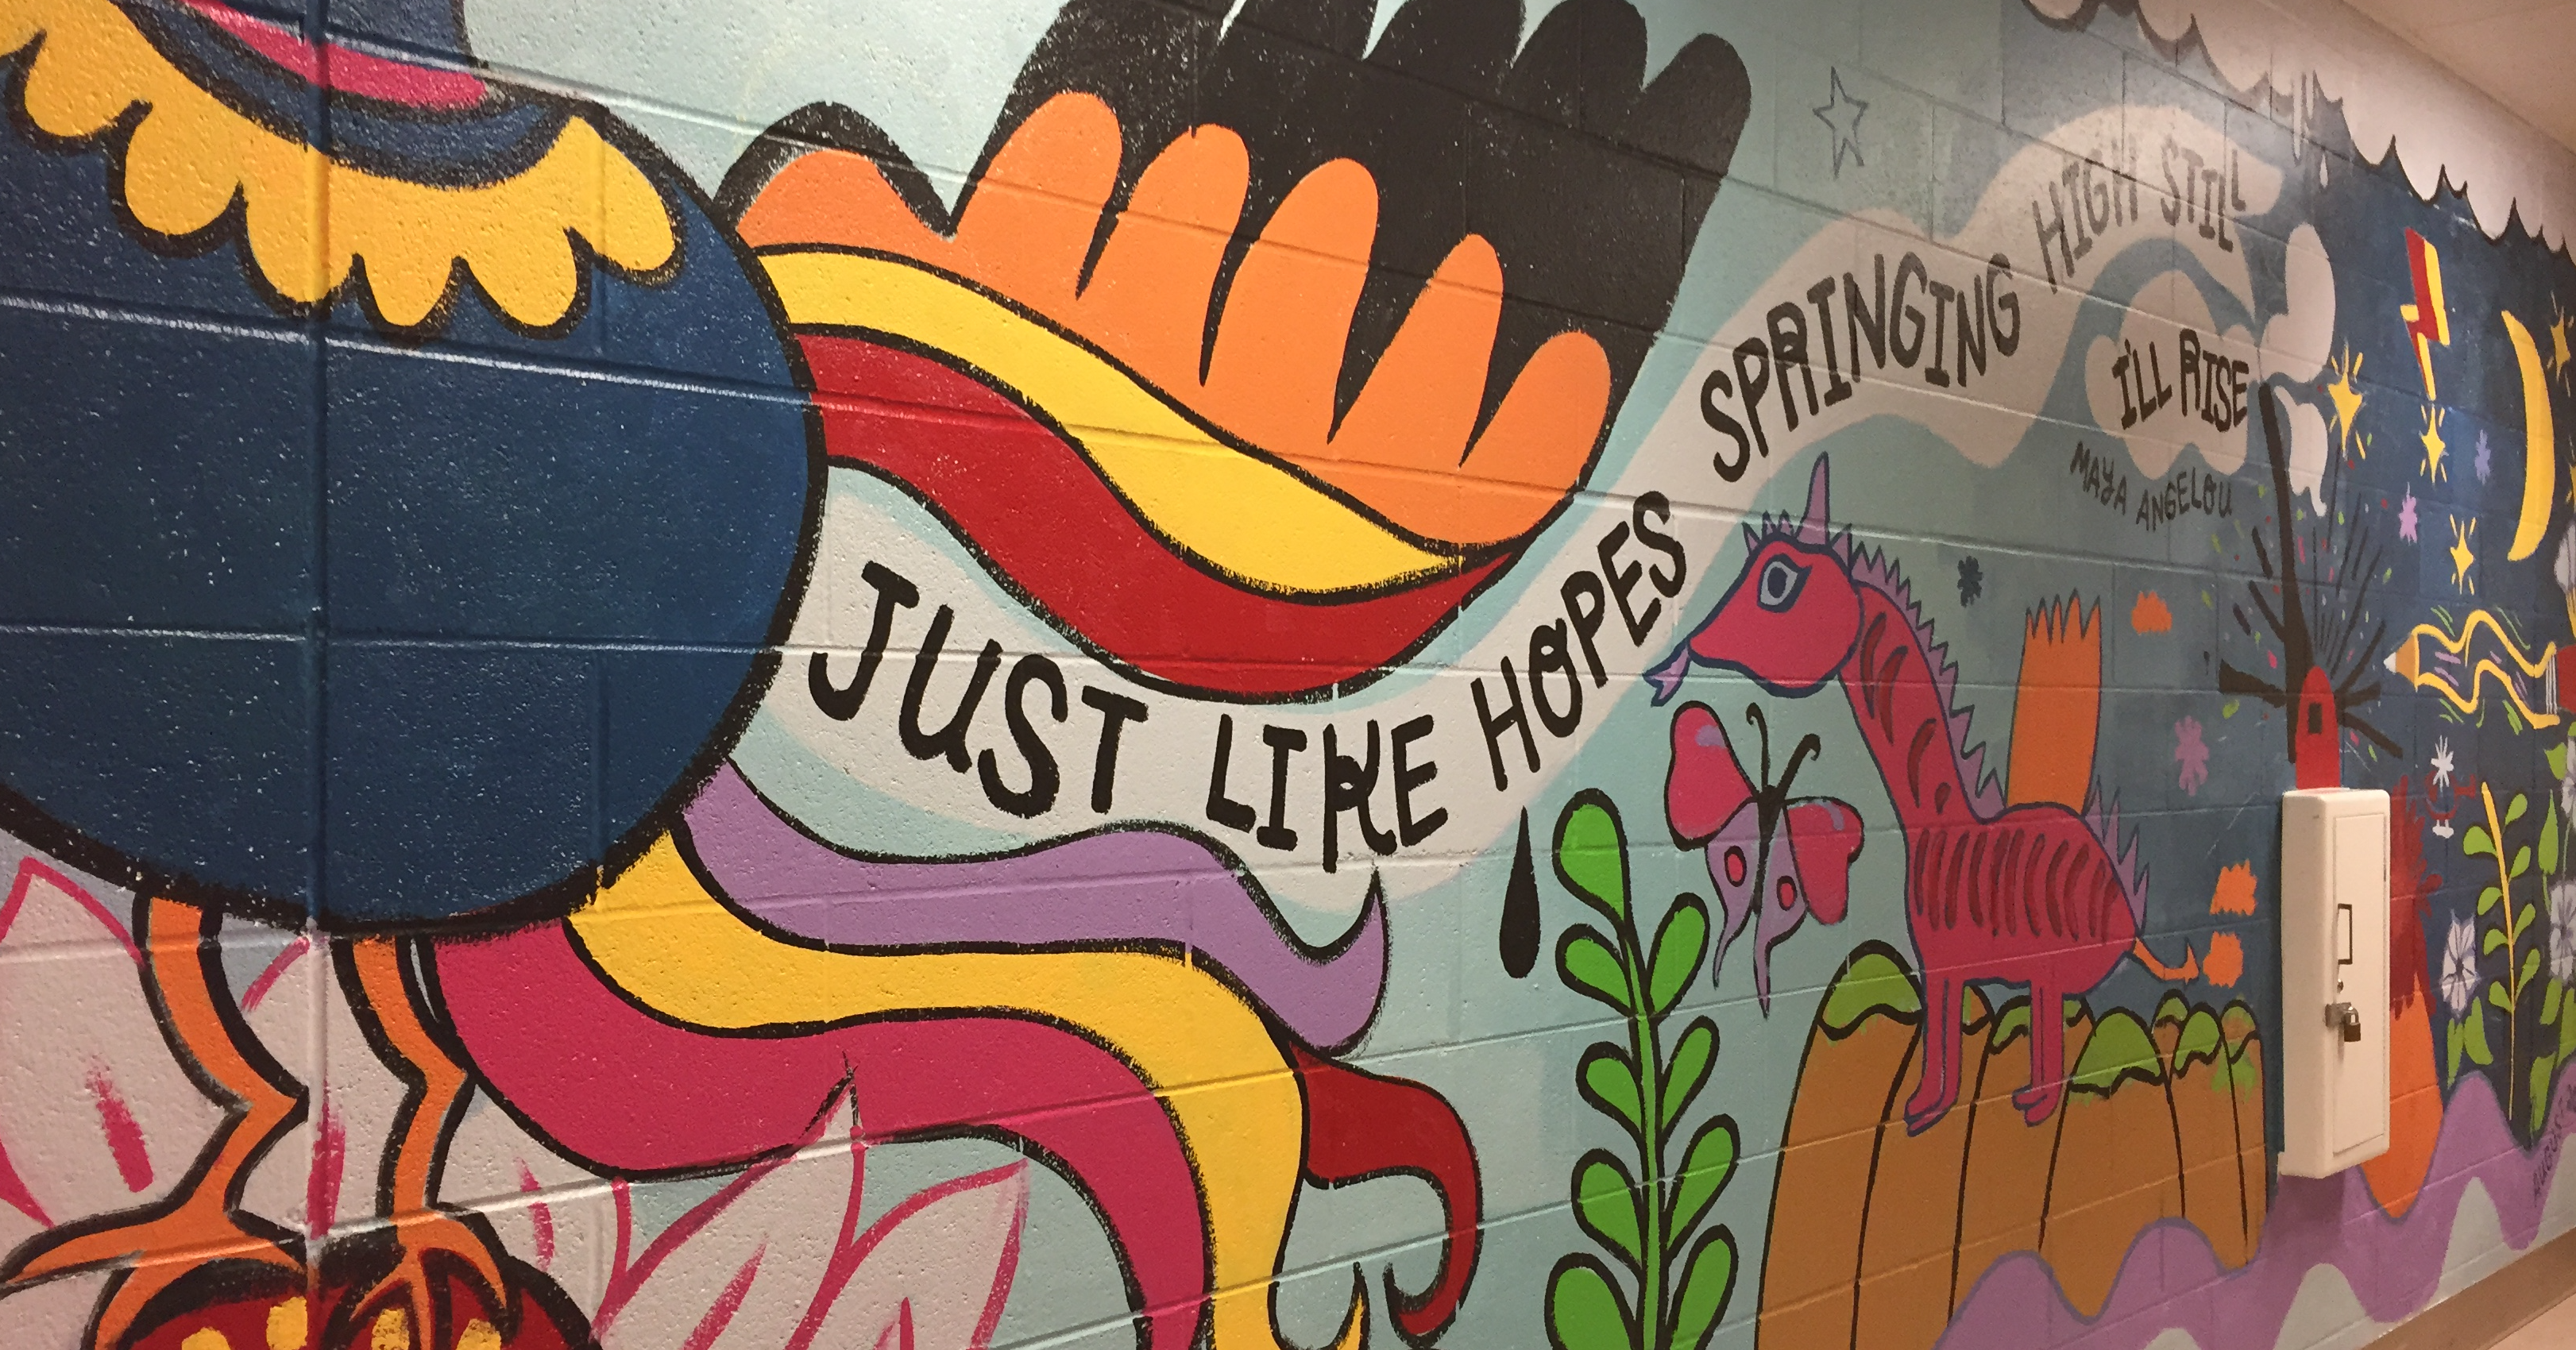 Madison Public Library's Bubbler Making Justice "Rise" mural residency with Lesley Anne Numbers